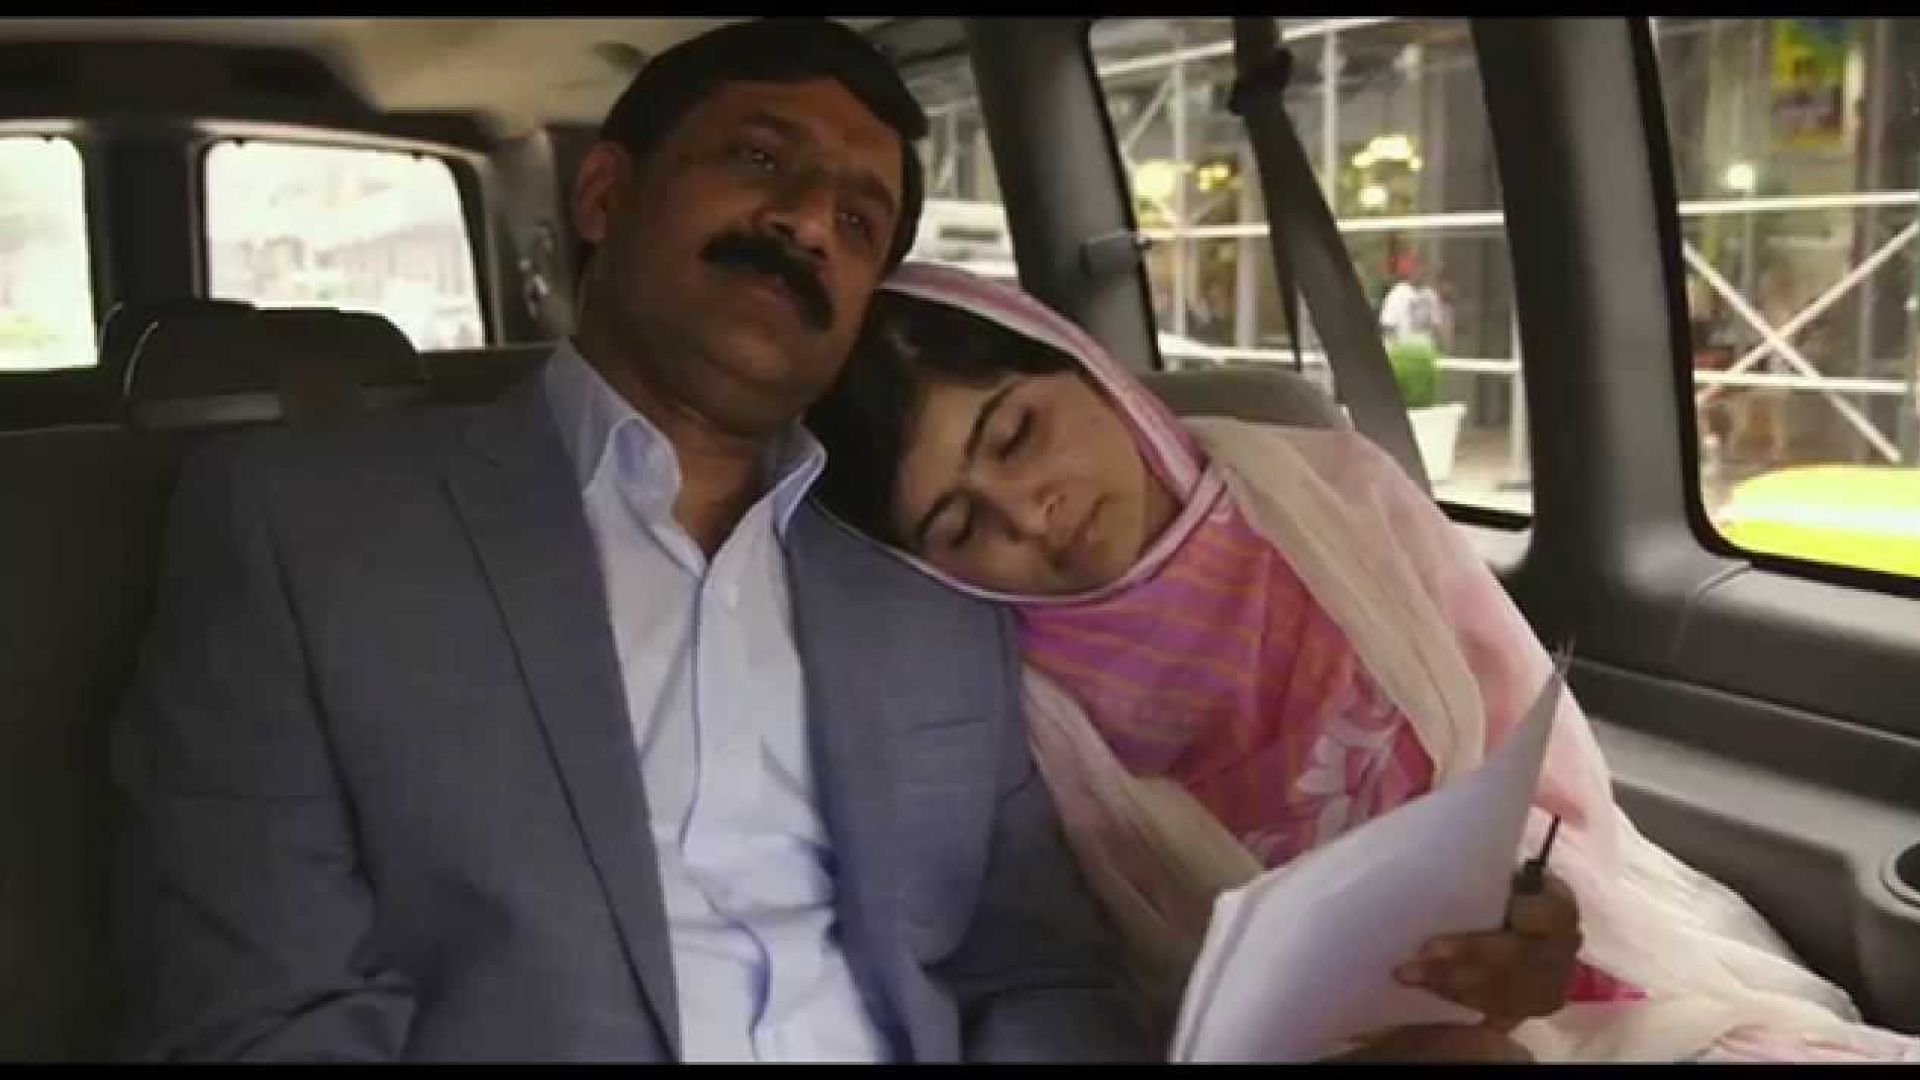 Watch new trailer for &#039;He Named Me Malala&#039;. In theaters Octo